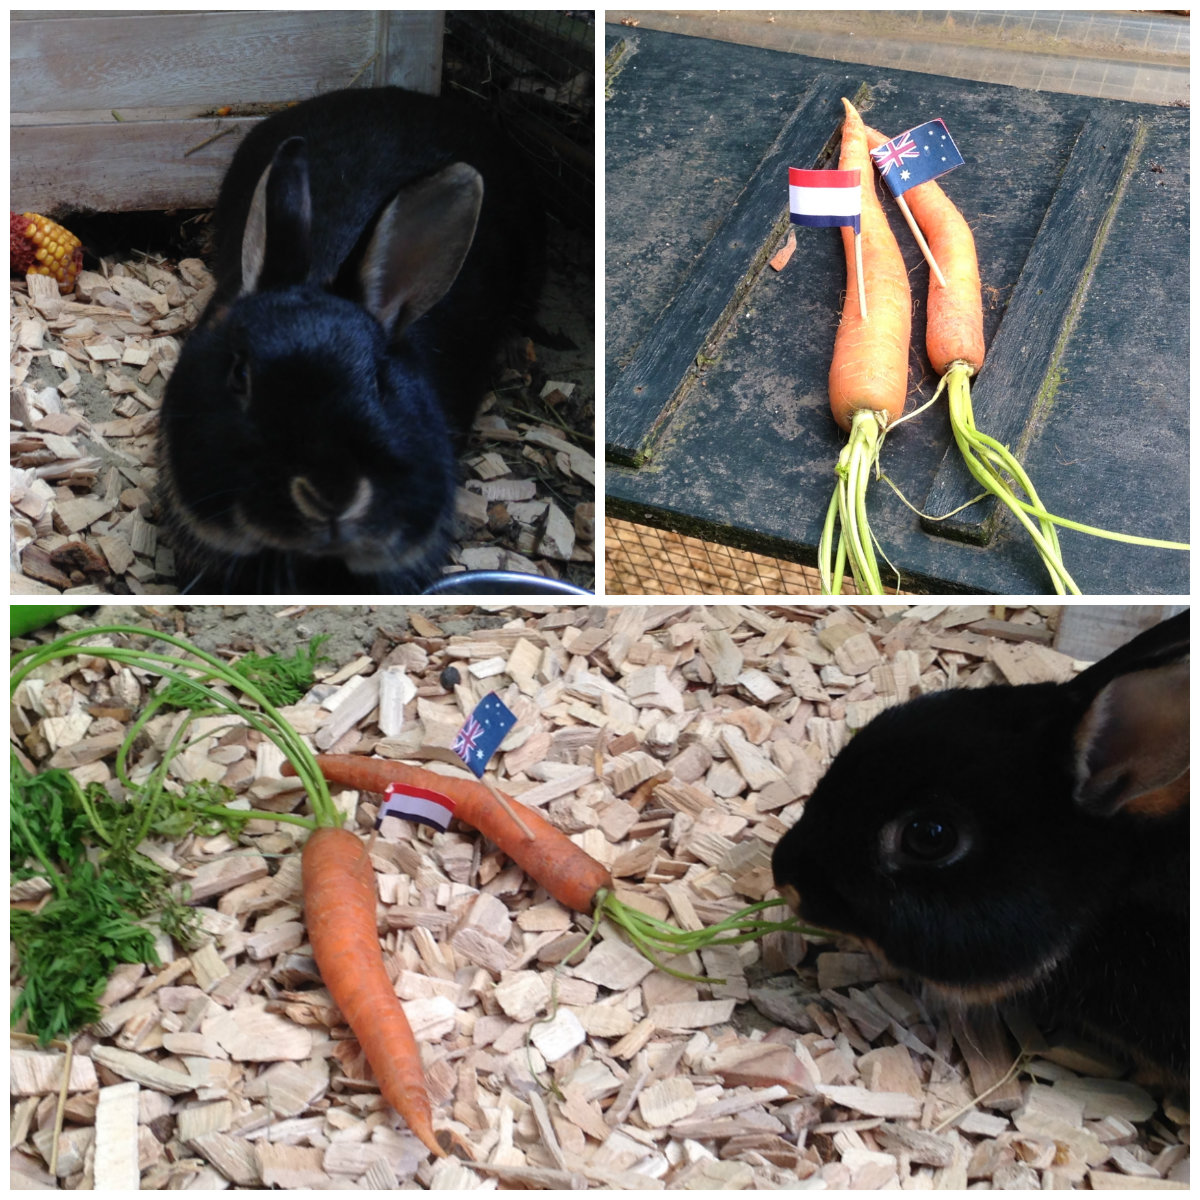 WC2014: Australia vs the Netherlands and what do rabbits think